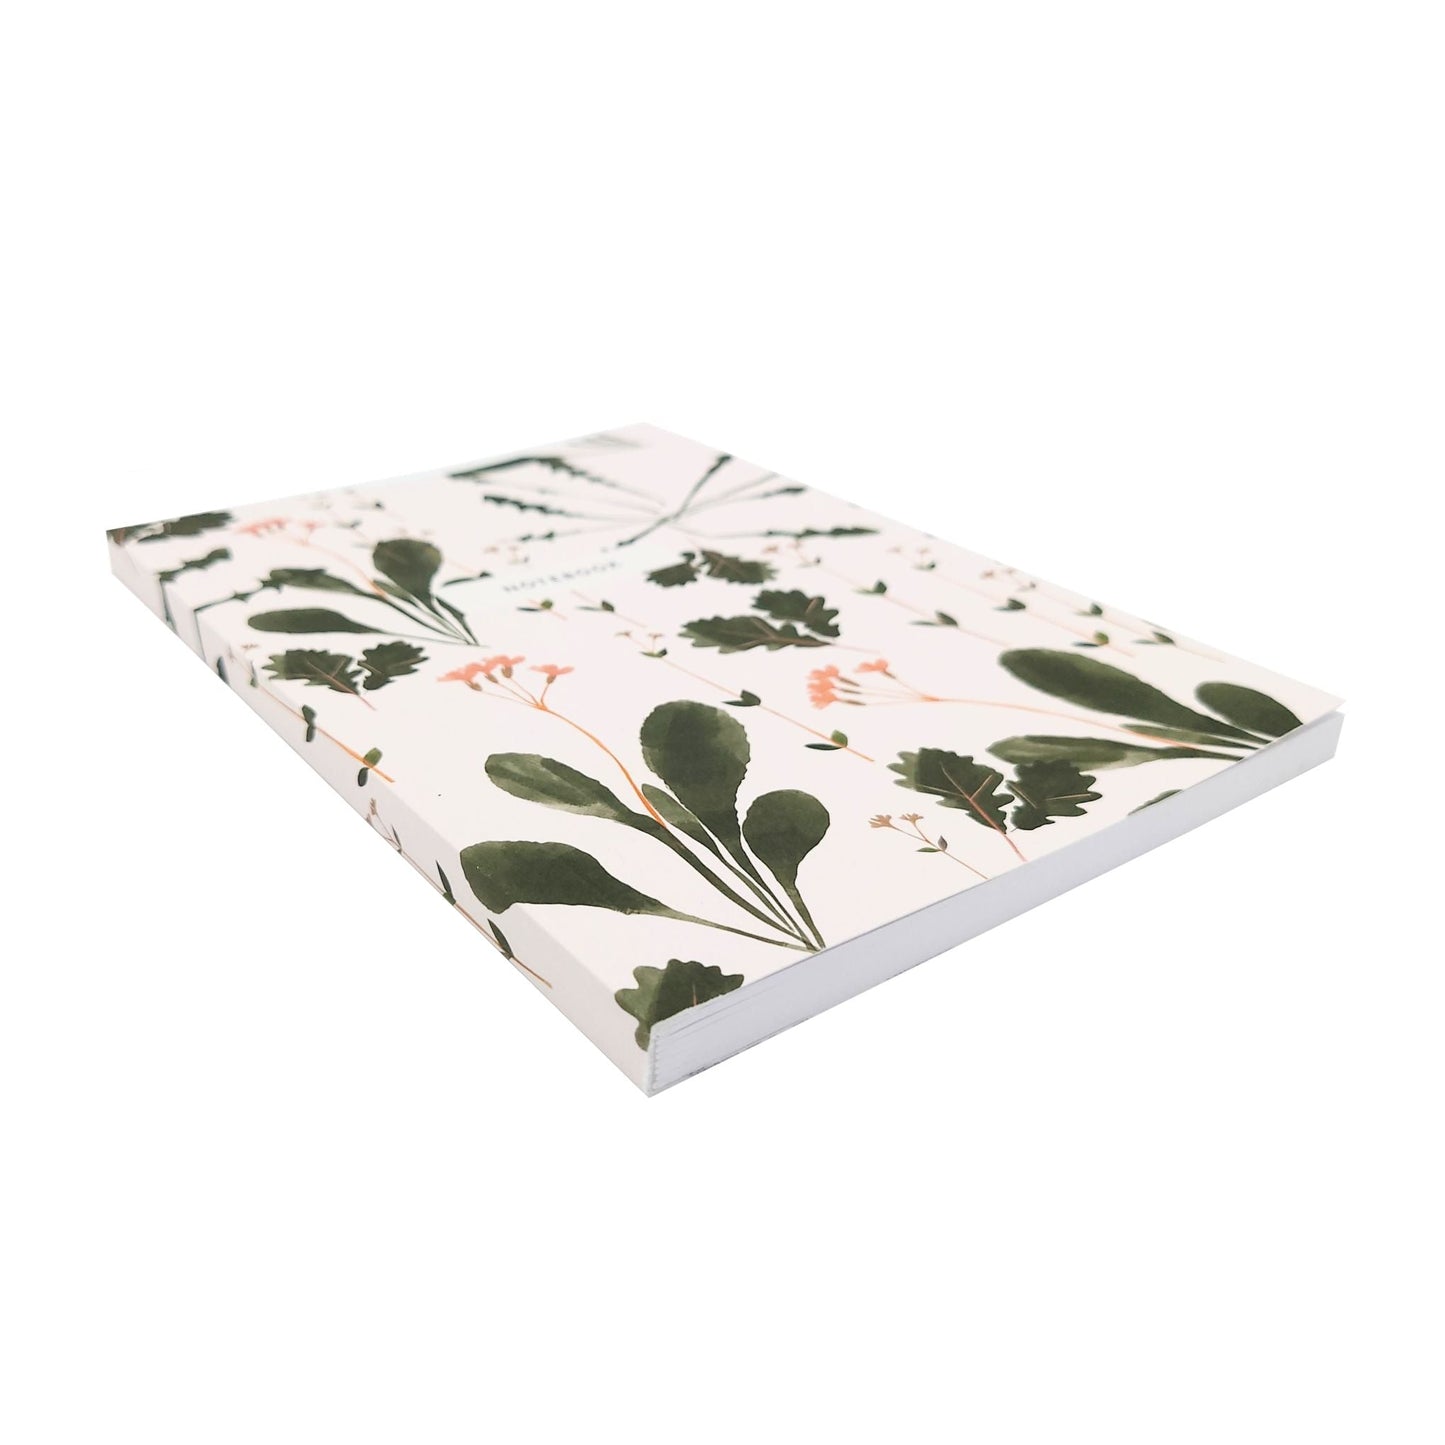 Wildflower print notebook seen at an angle.